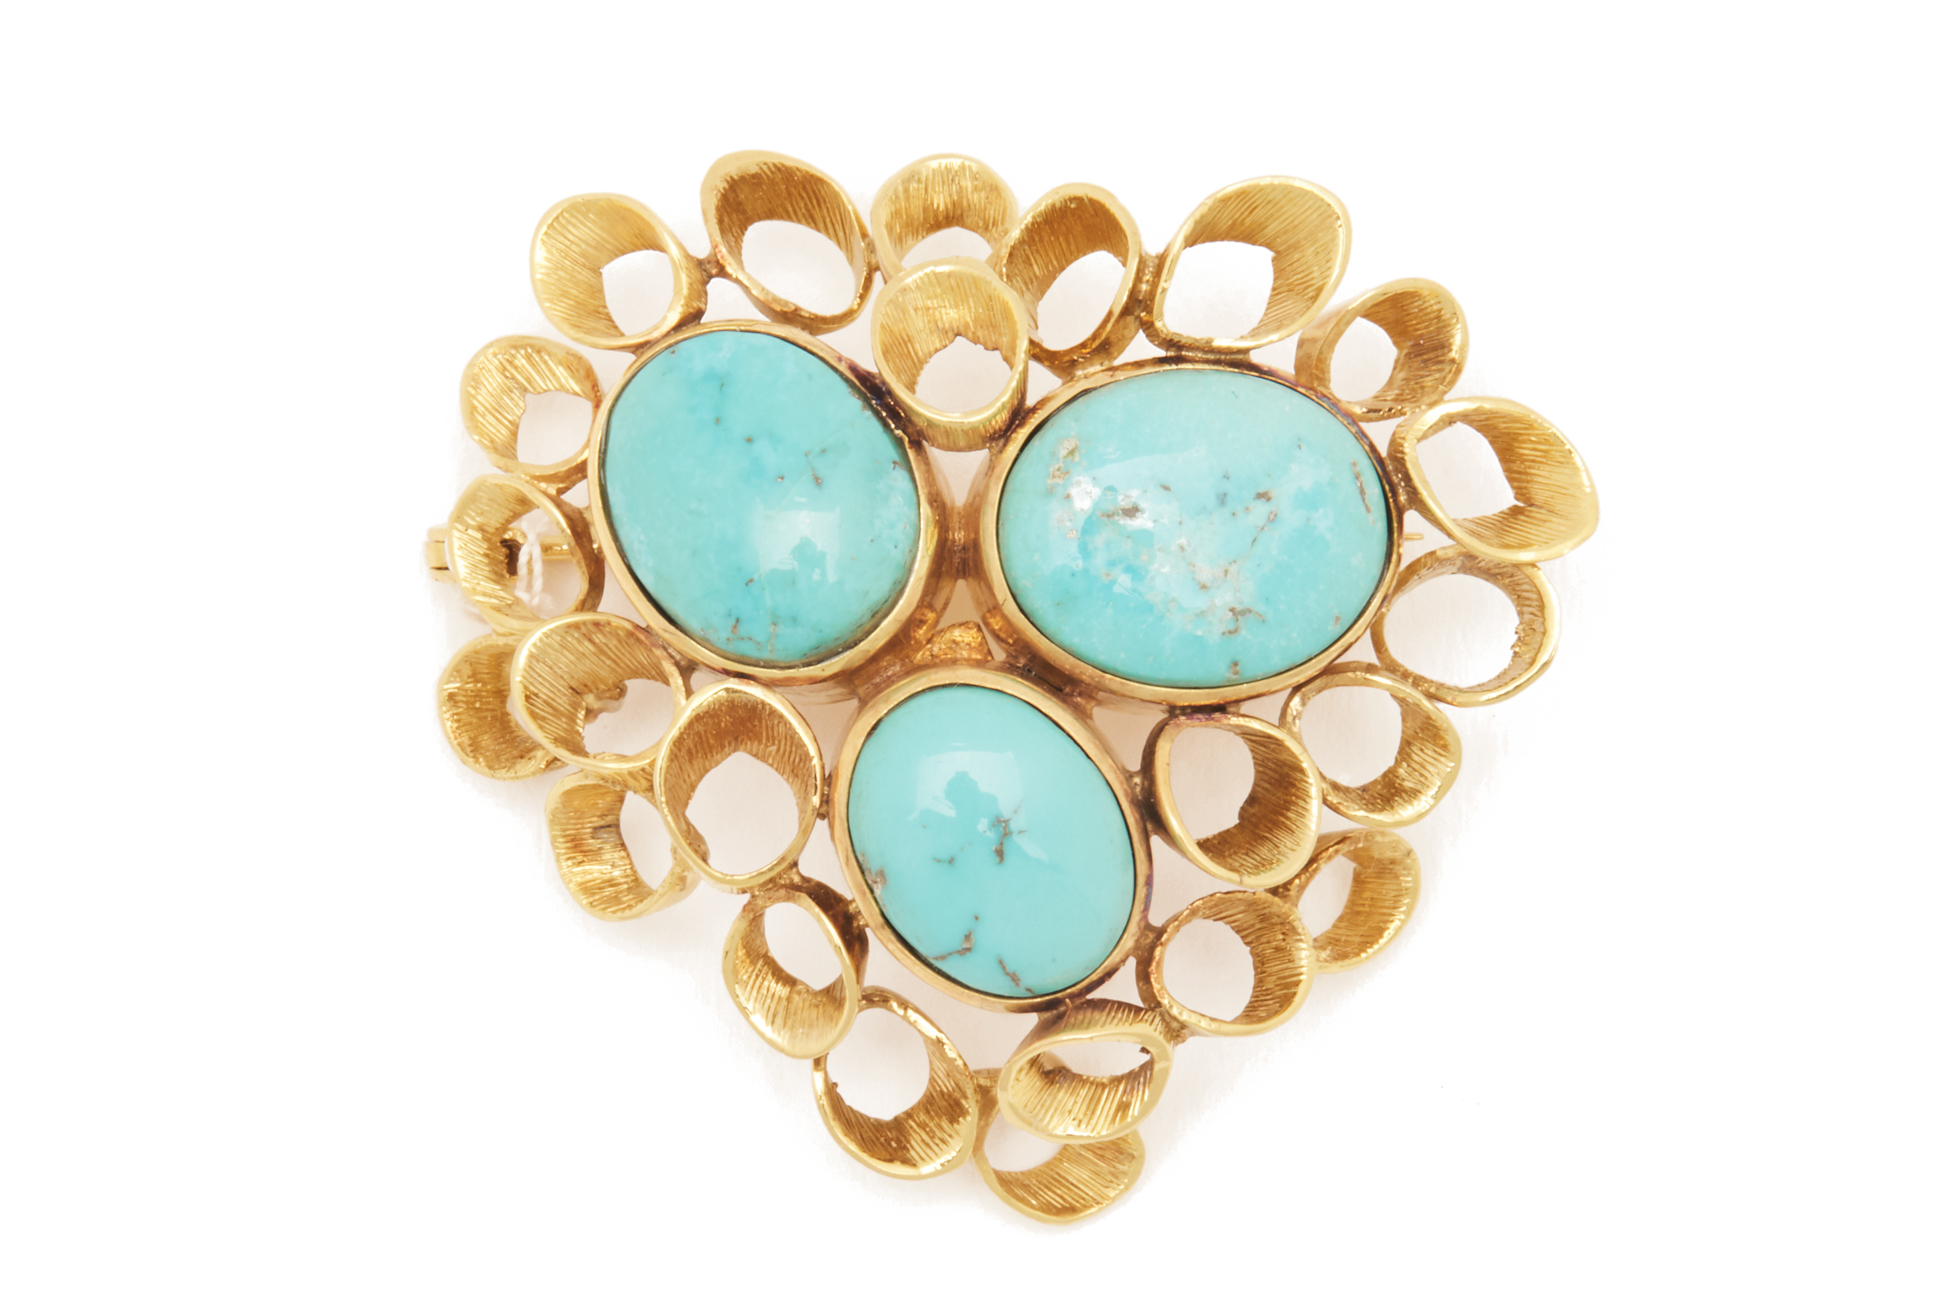 A GOLD AND TURQUOISE BROOCH